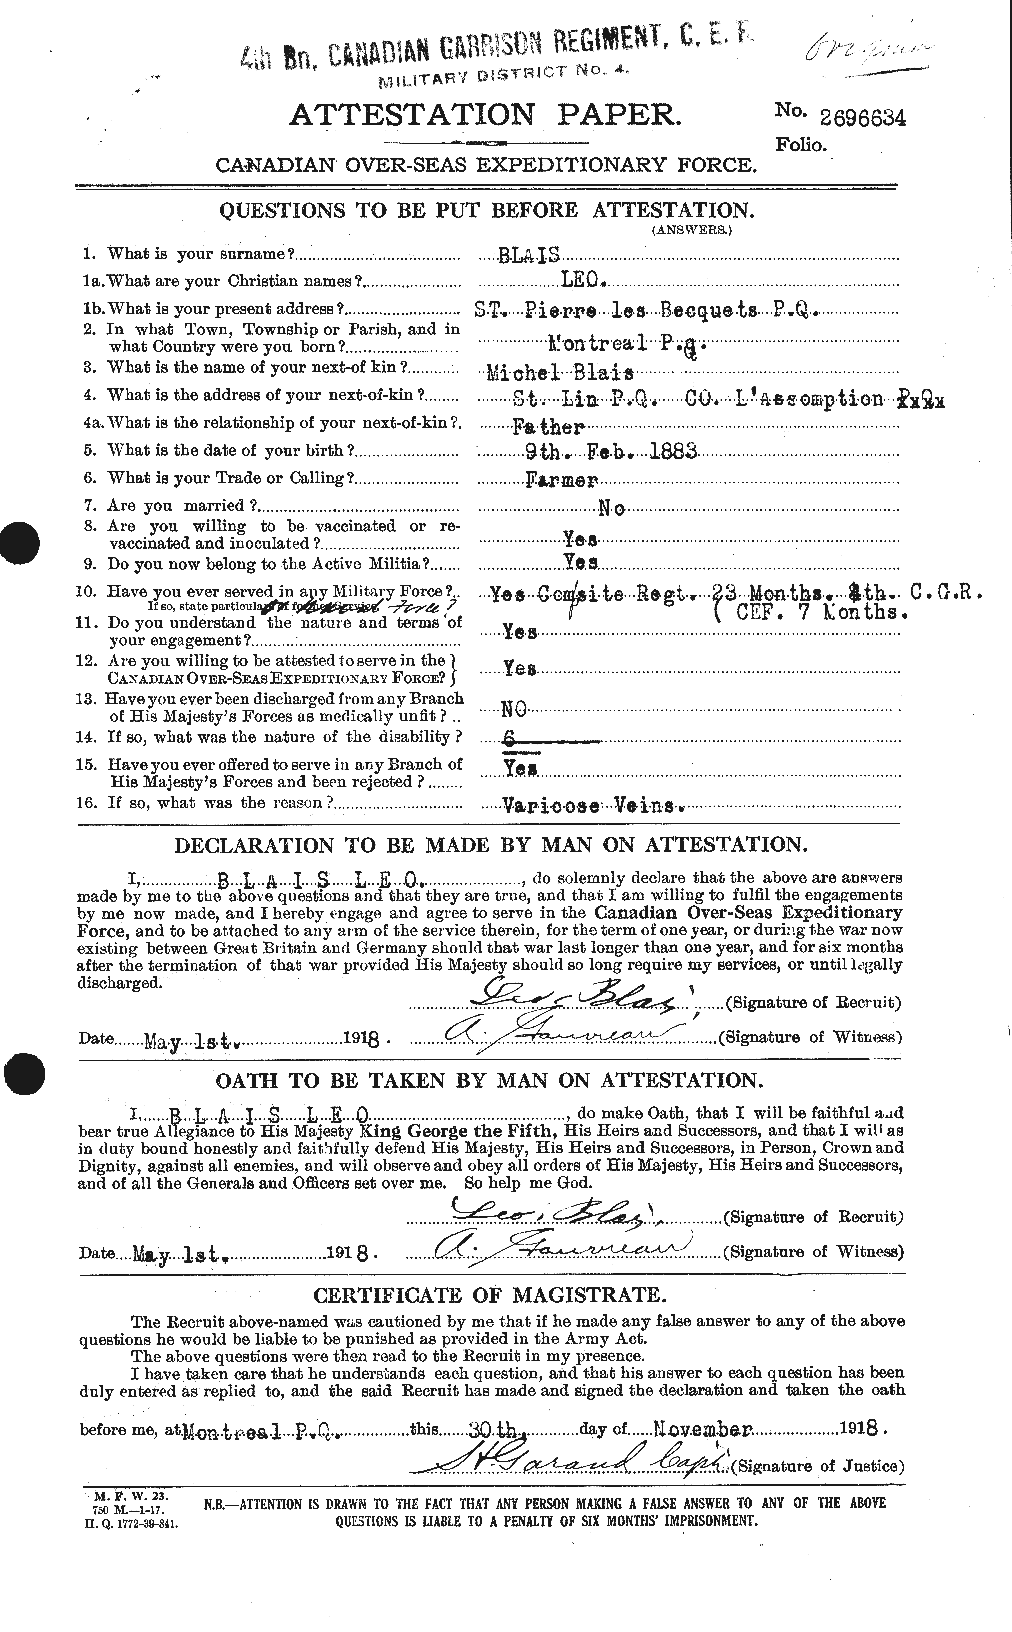 Personnel Records of the First World War - CEF 245492a